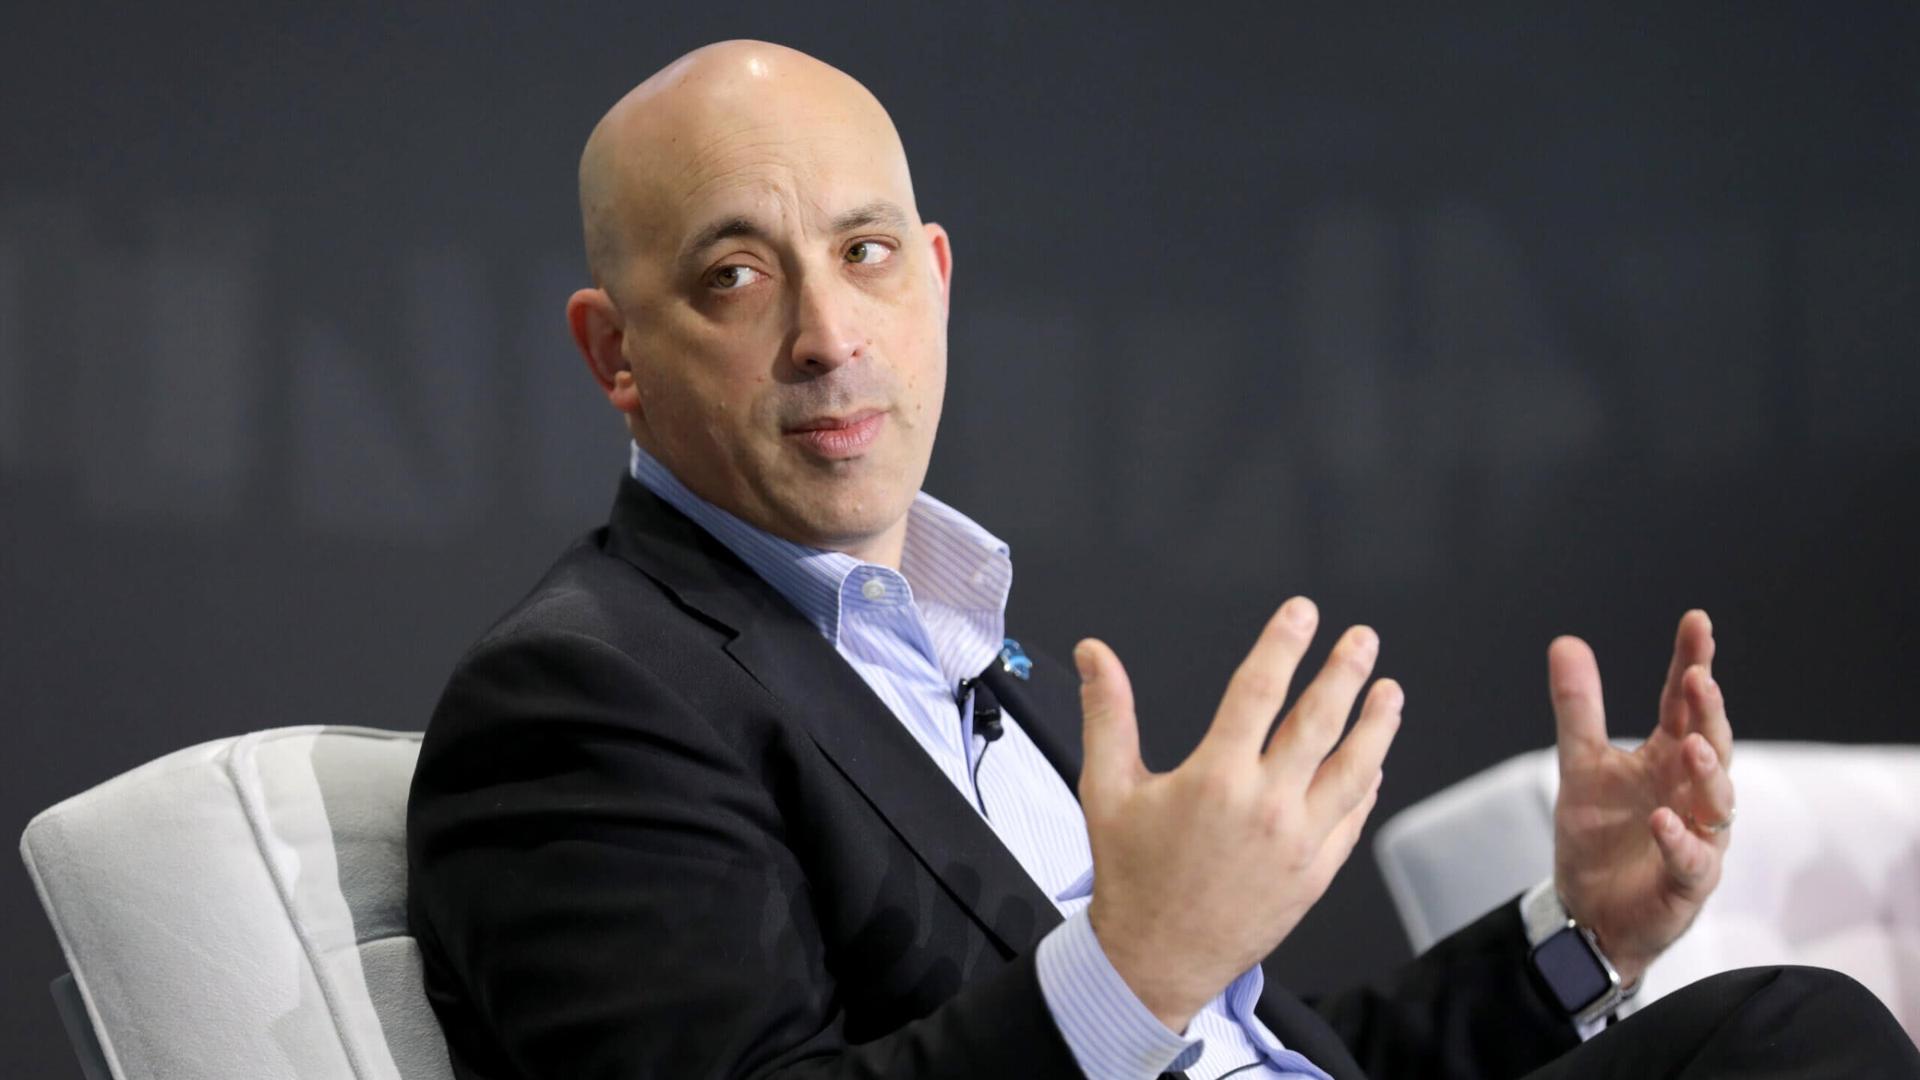 Jonathan Greenblatt, the CEO of the ADL, called Elon Musk's actions "flat-out dangerous." (Getty)